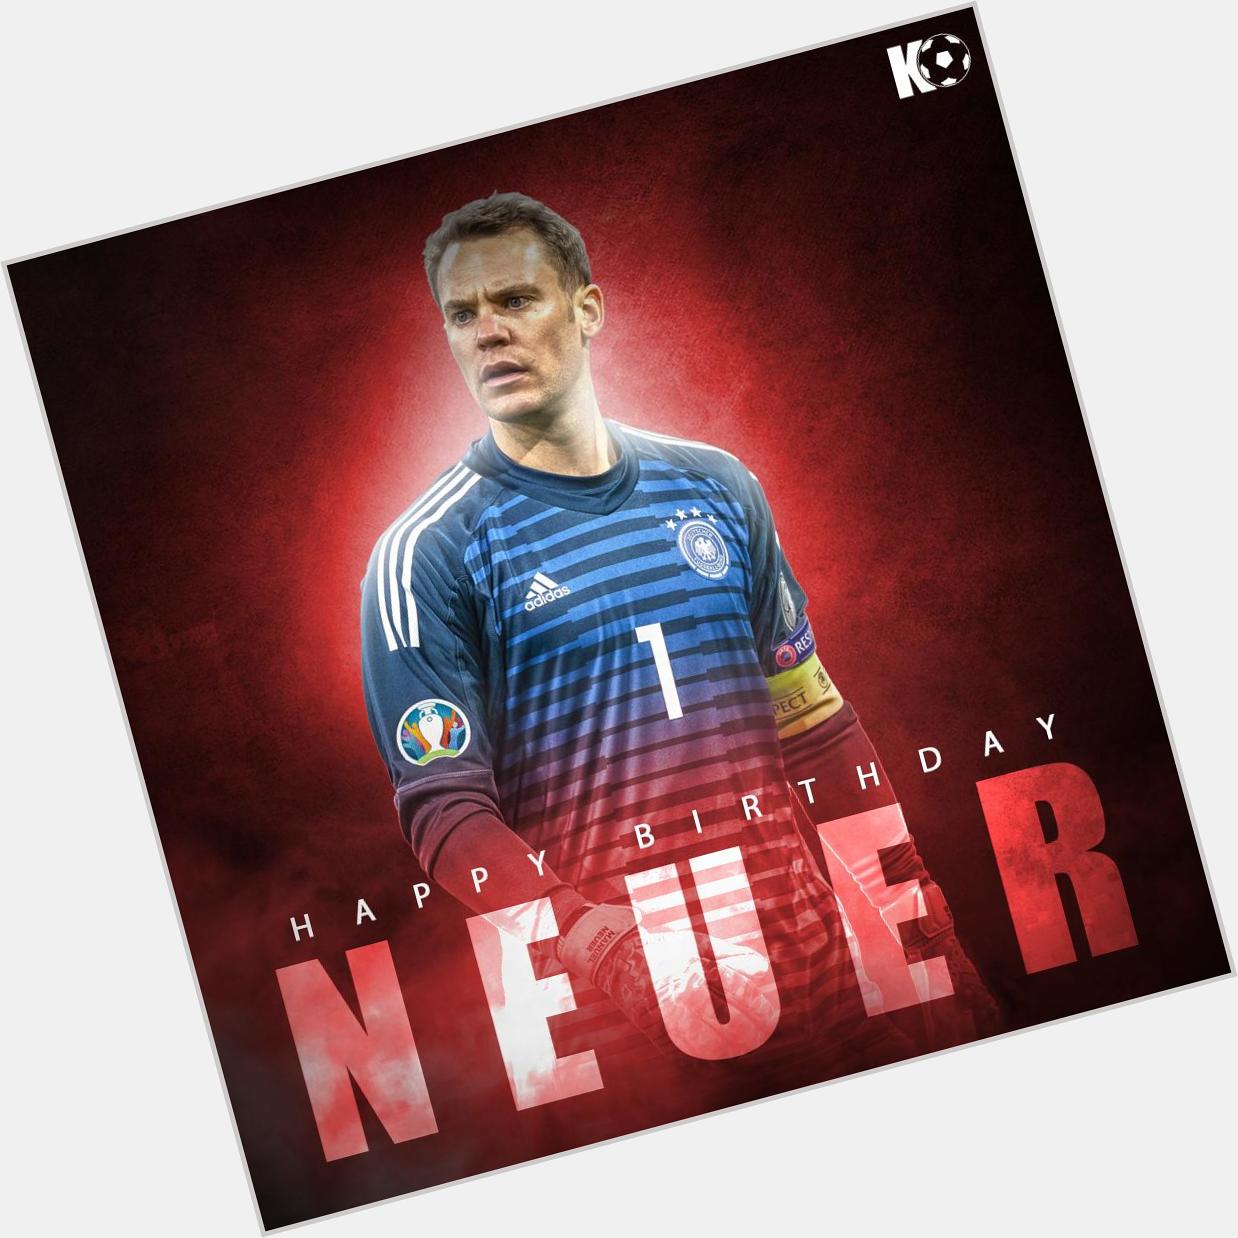 The Bayern Munich goalkeeper turns 33 today! Join in wishing Manuel Neuer a Happy Birthday 